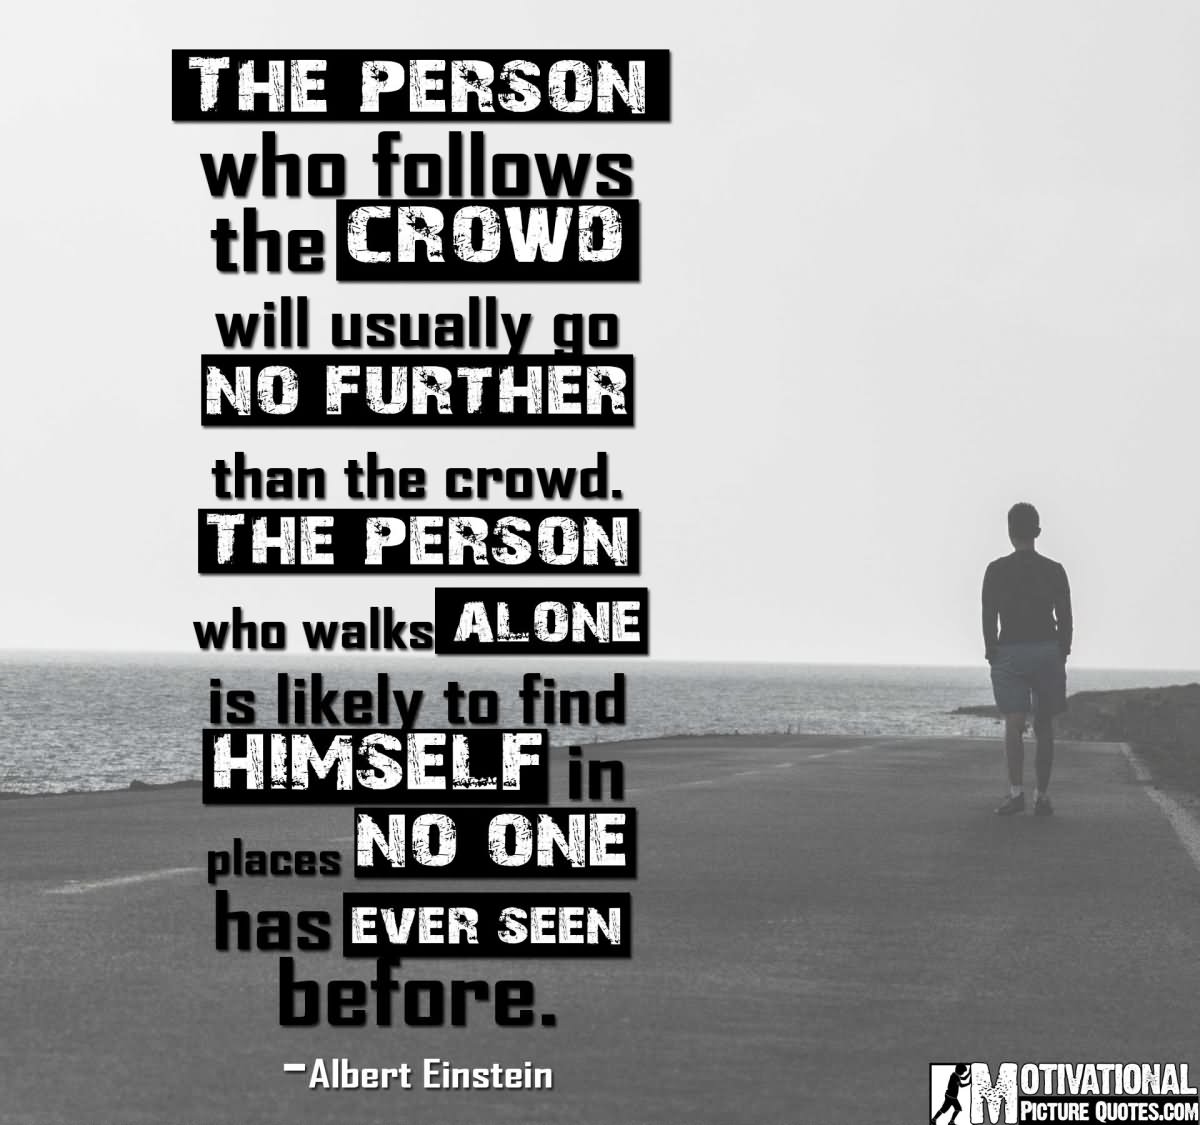 The person who follows the crowd will usually get no further than the crowd. The person who walks alone is likely to find himself in places no one has ever been before.